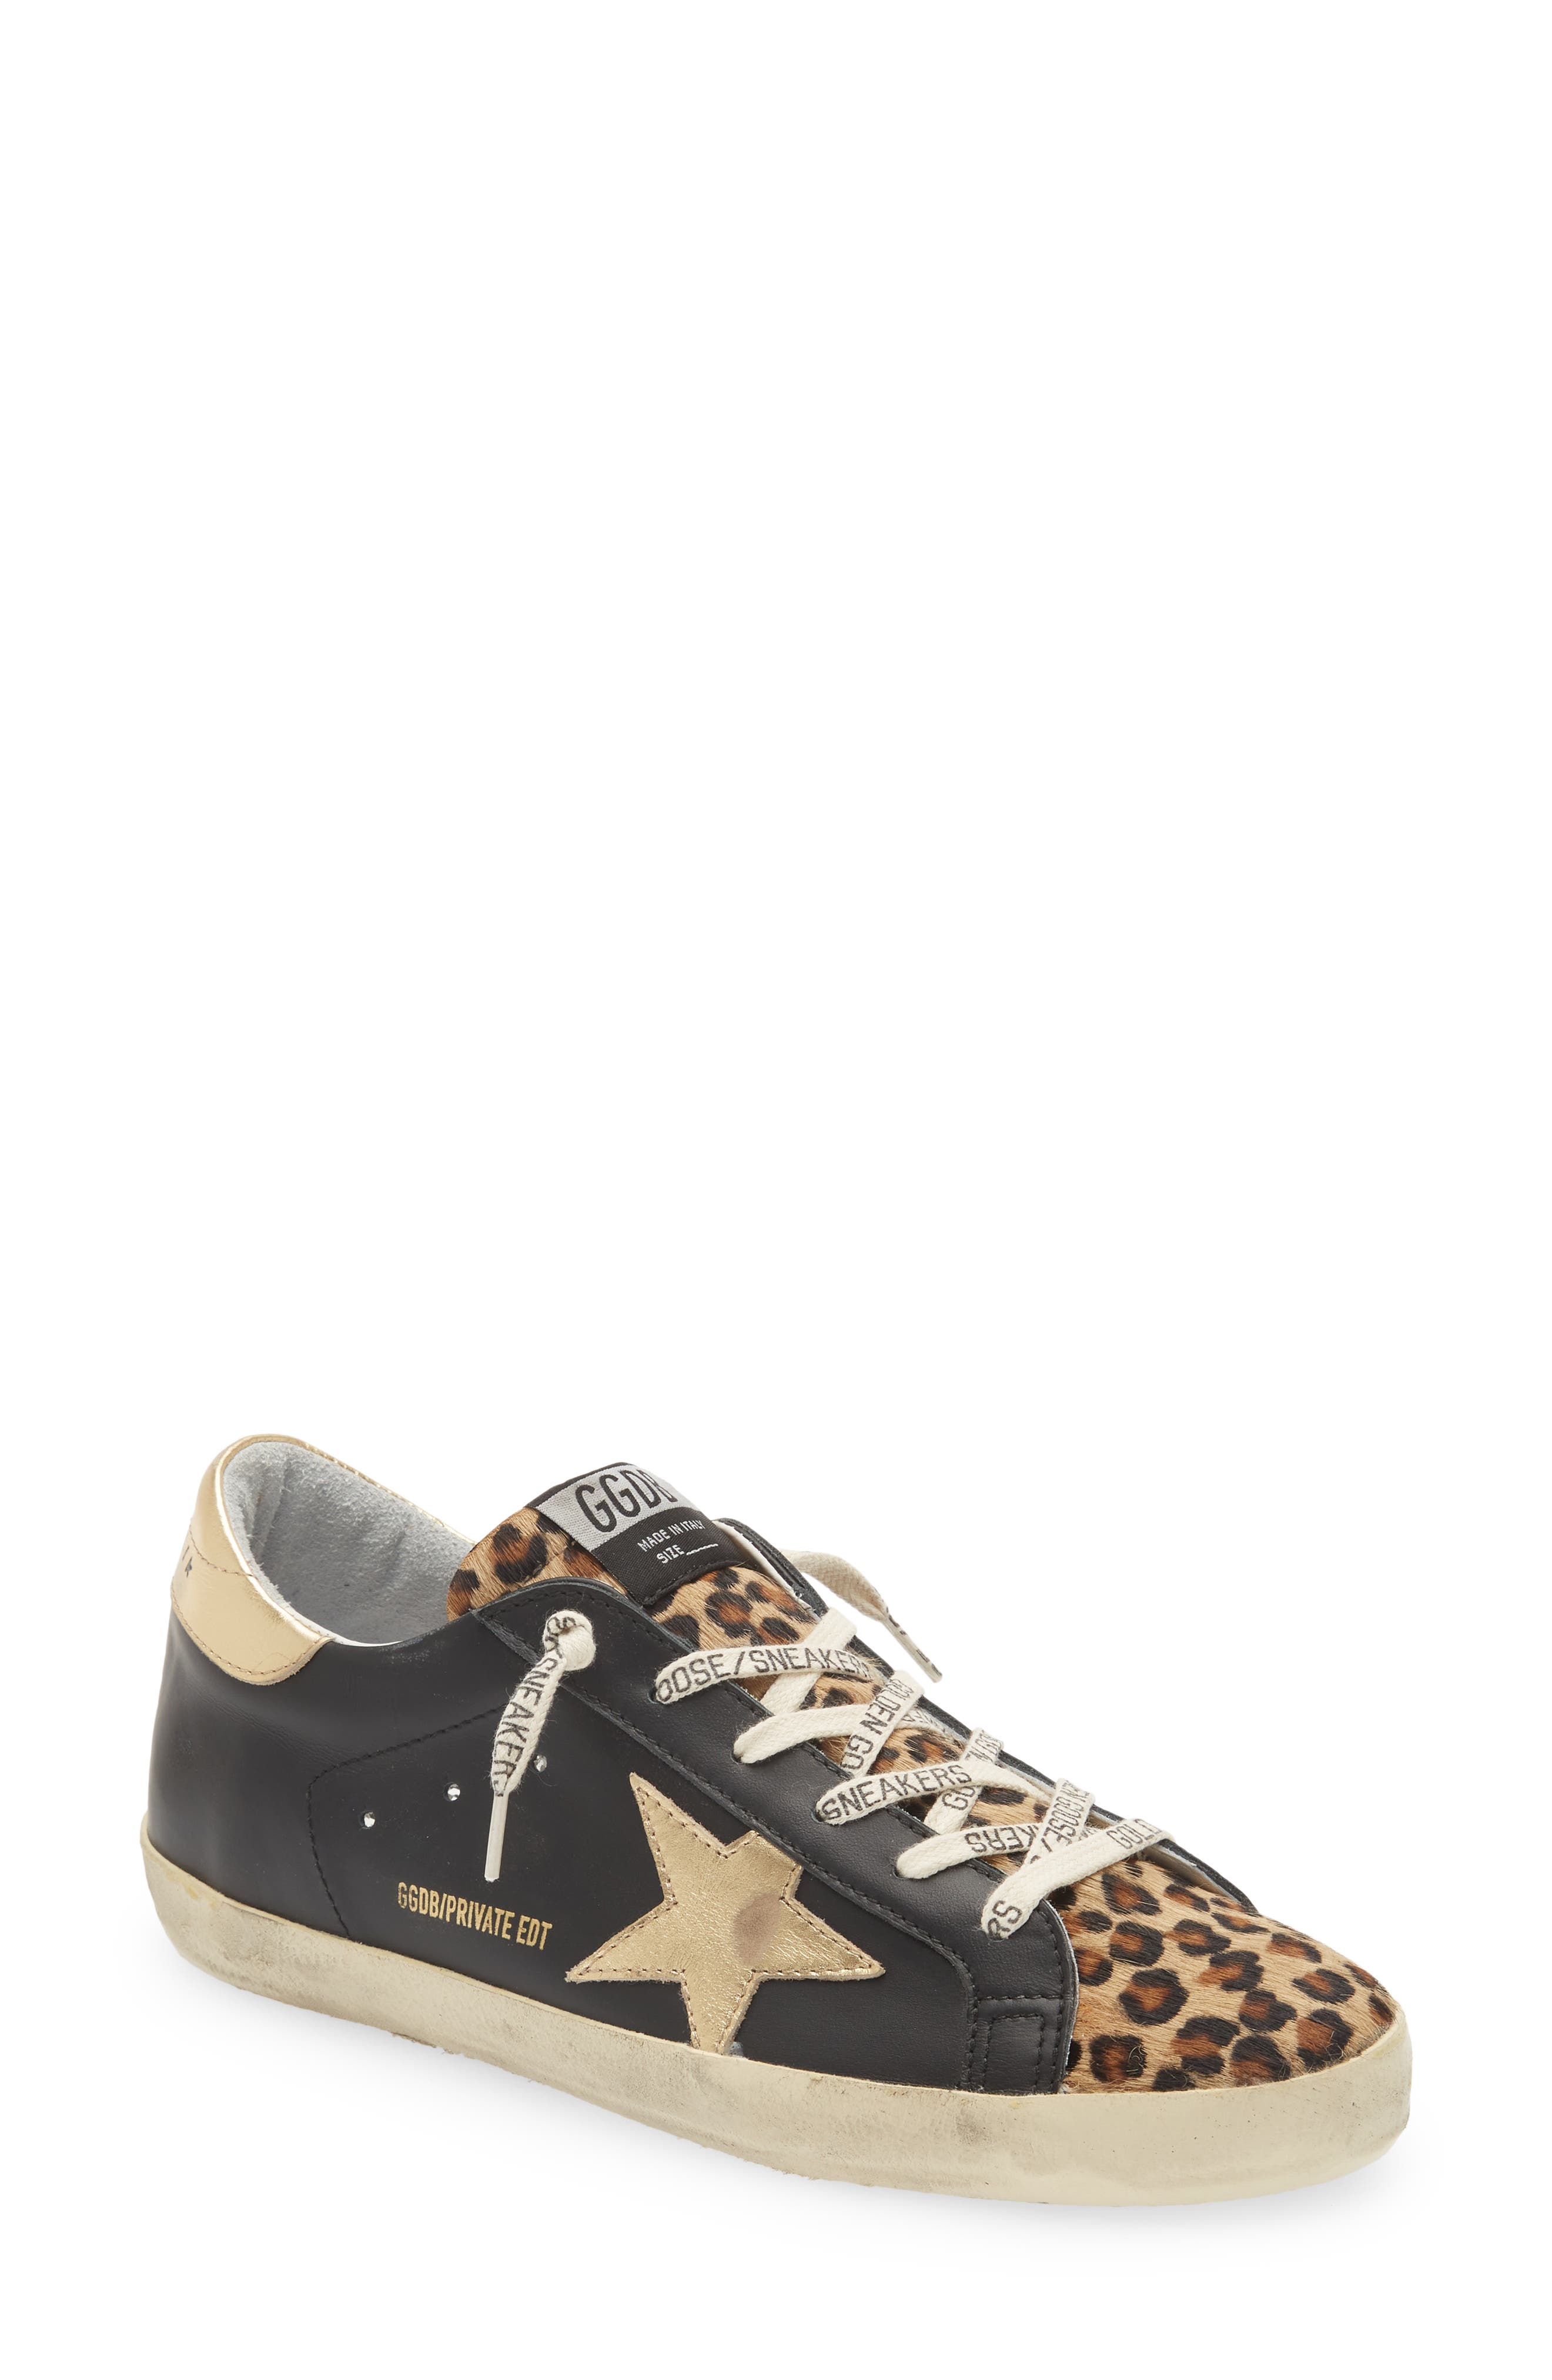 black and leopard tennis shoes